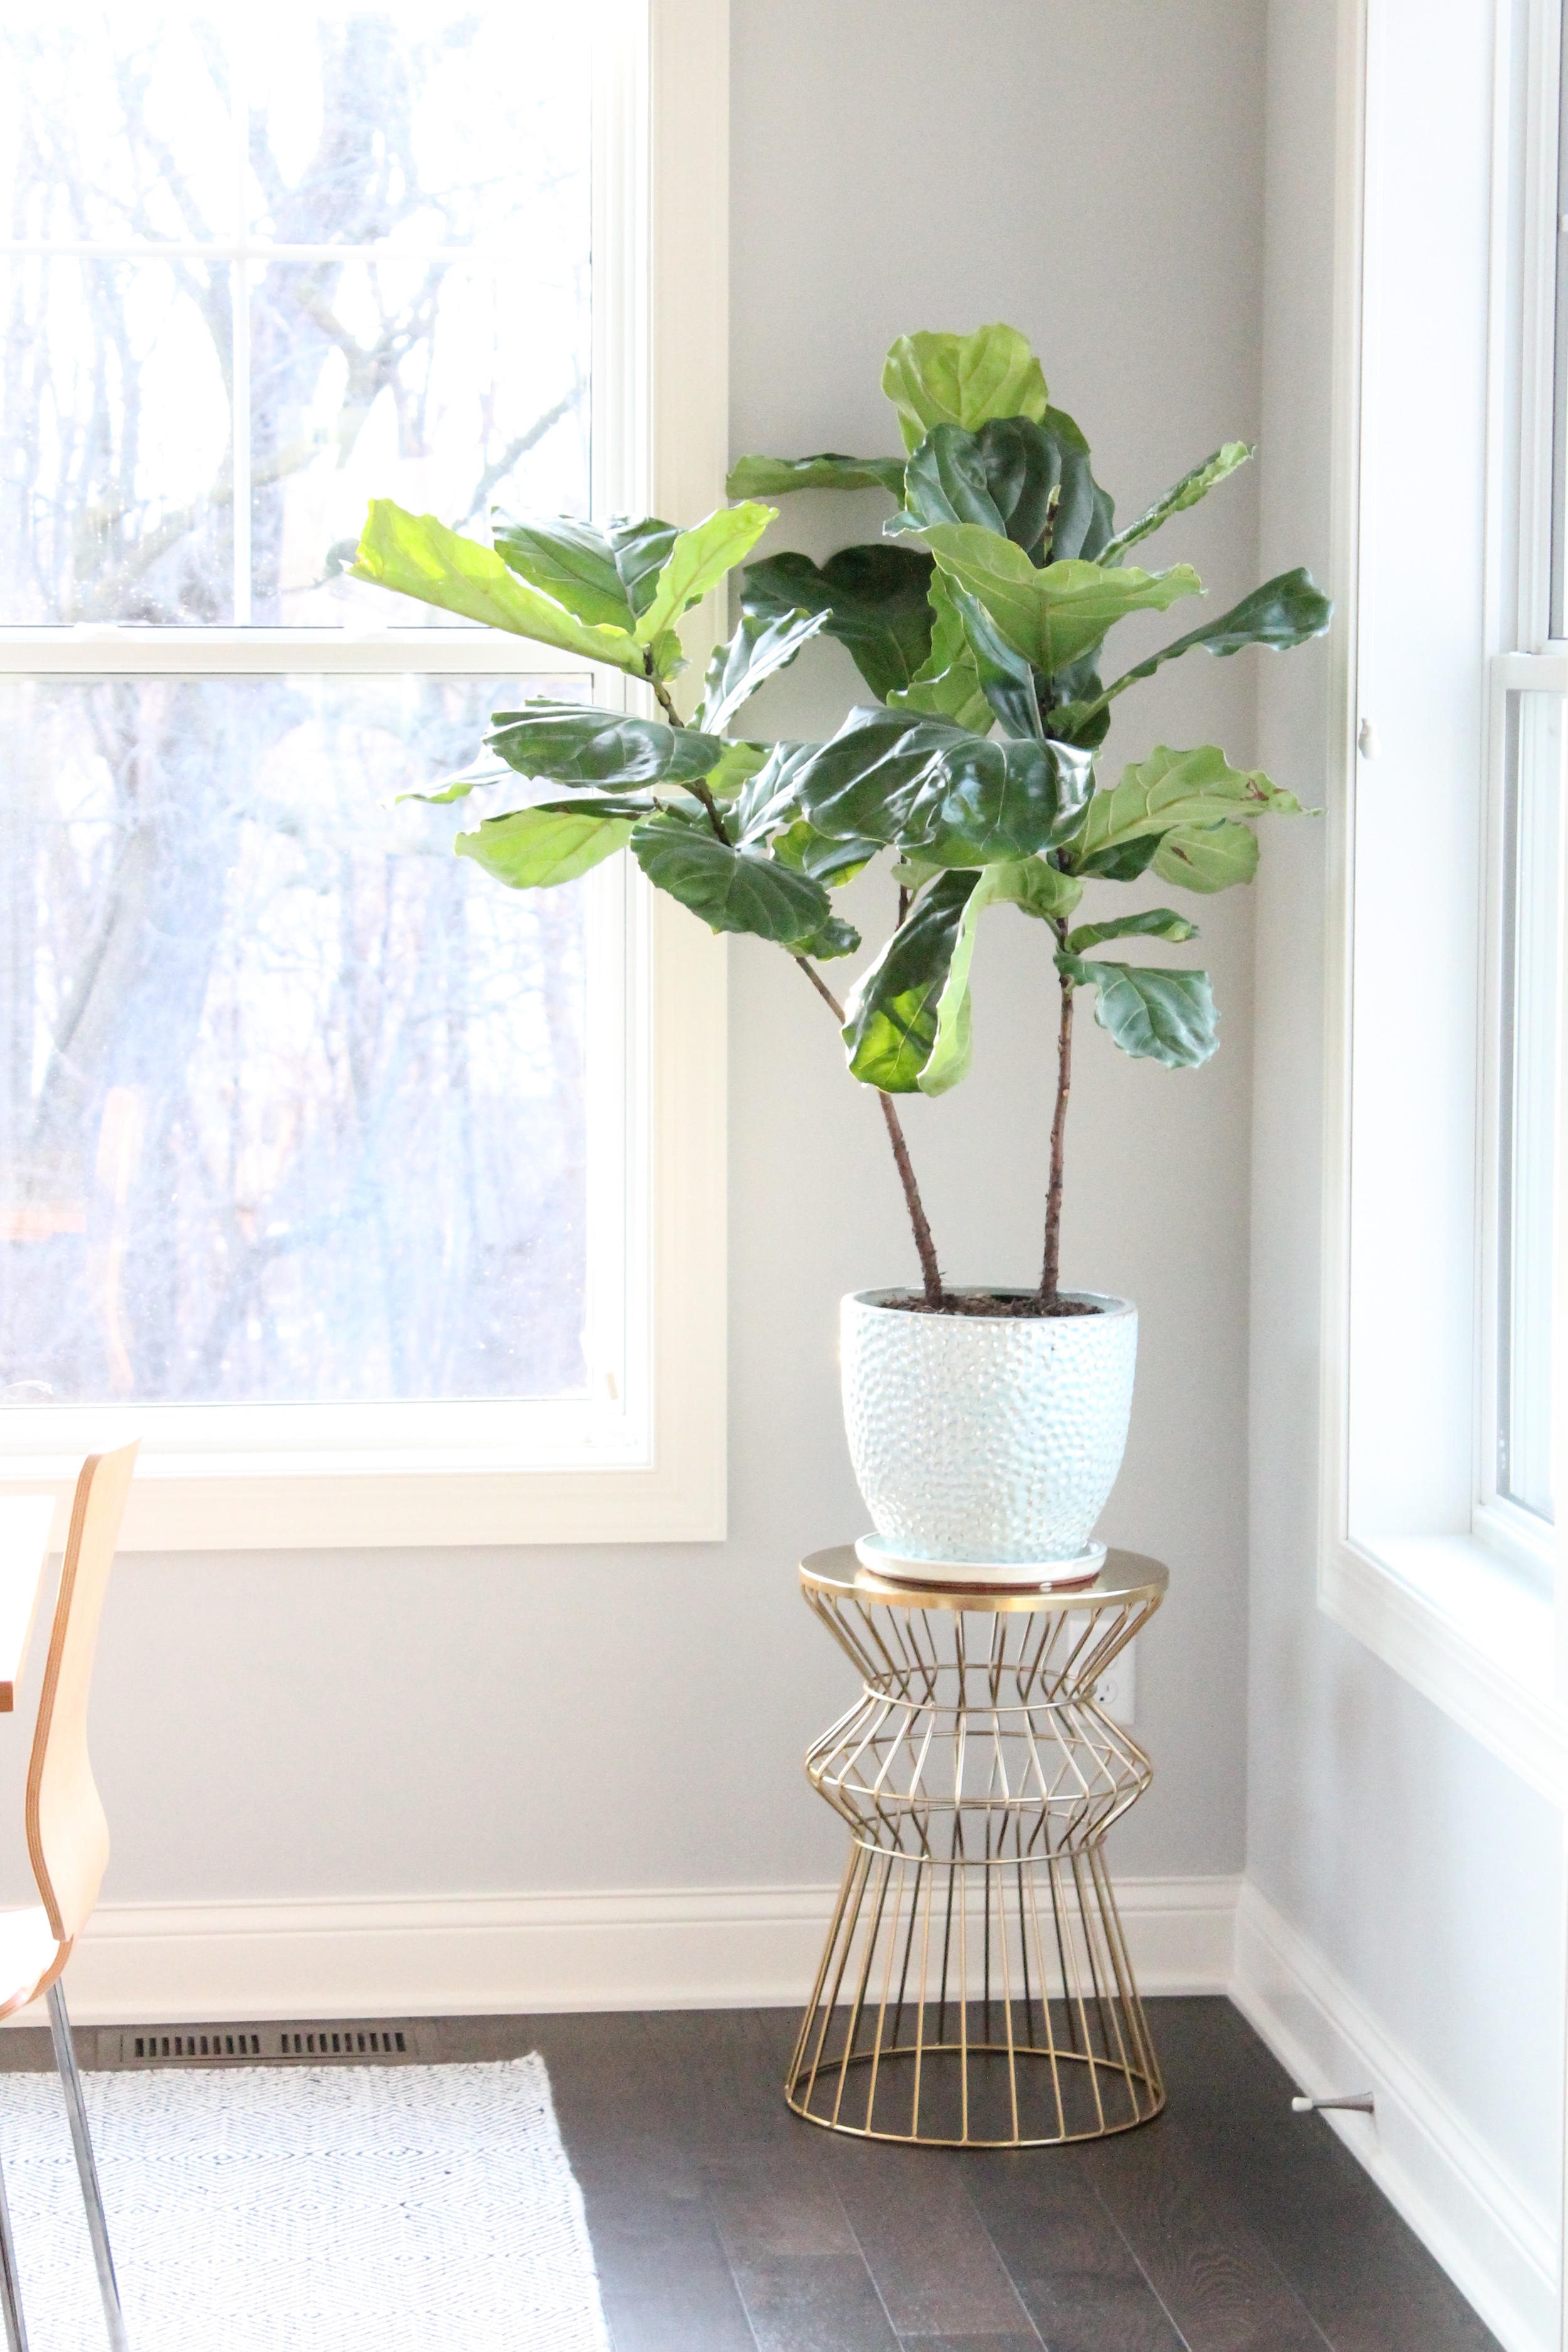 Fiddly Fig plant on Gold plant stand. I love the life that it adds to this sunny breakfast nook.